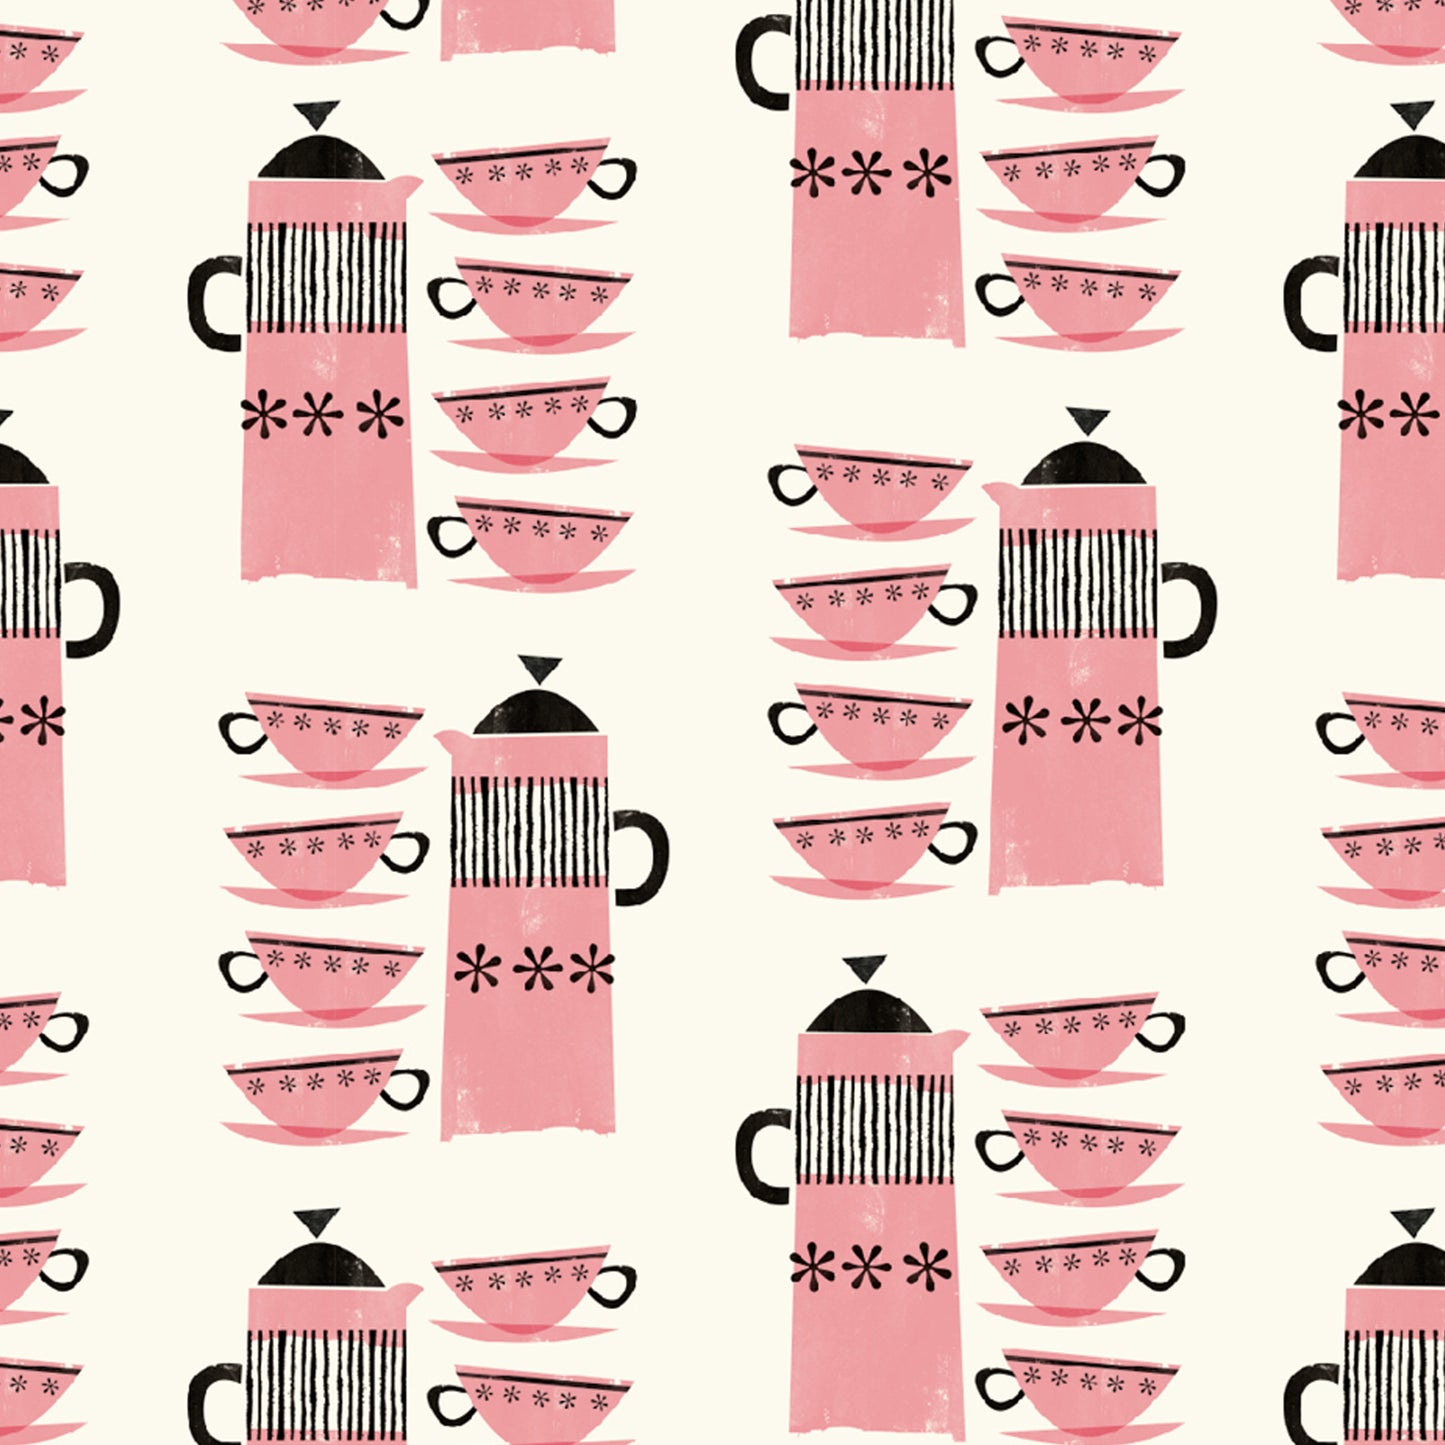 Just Patterns: Pink Coffee Pots